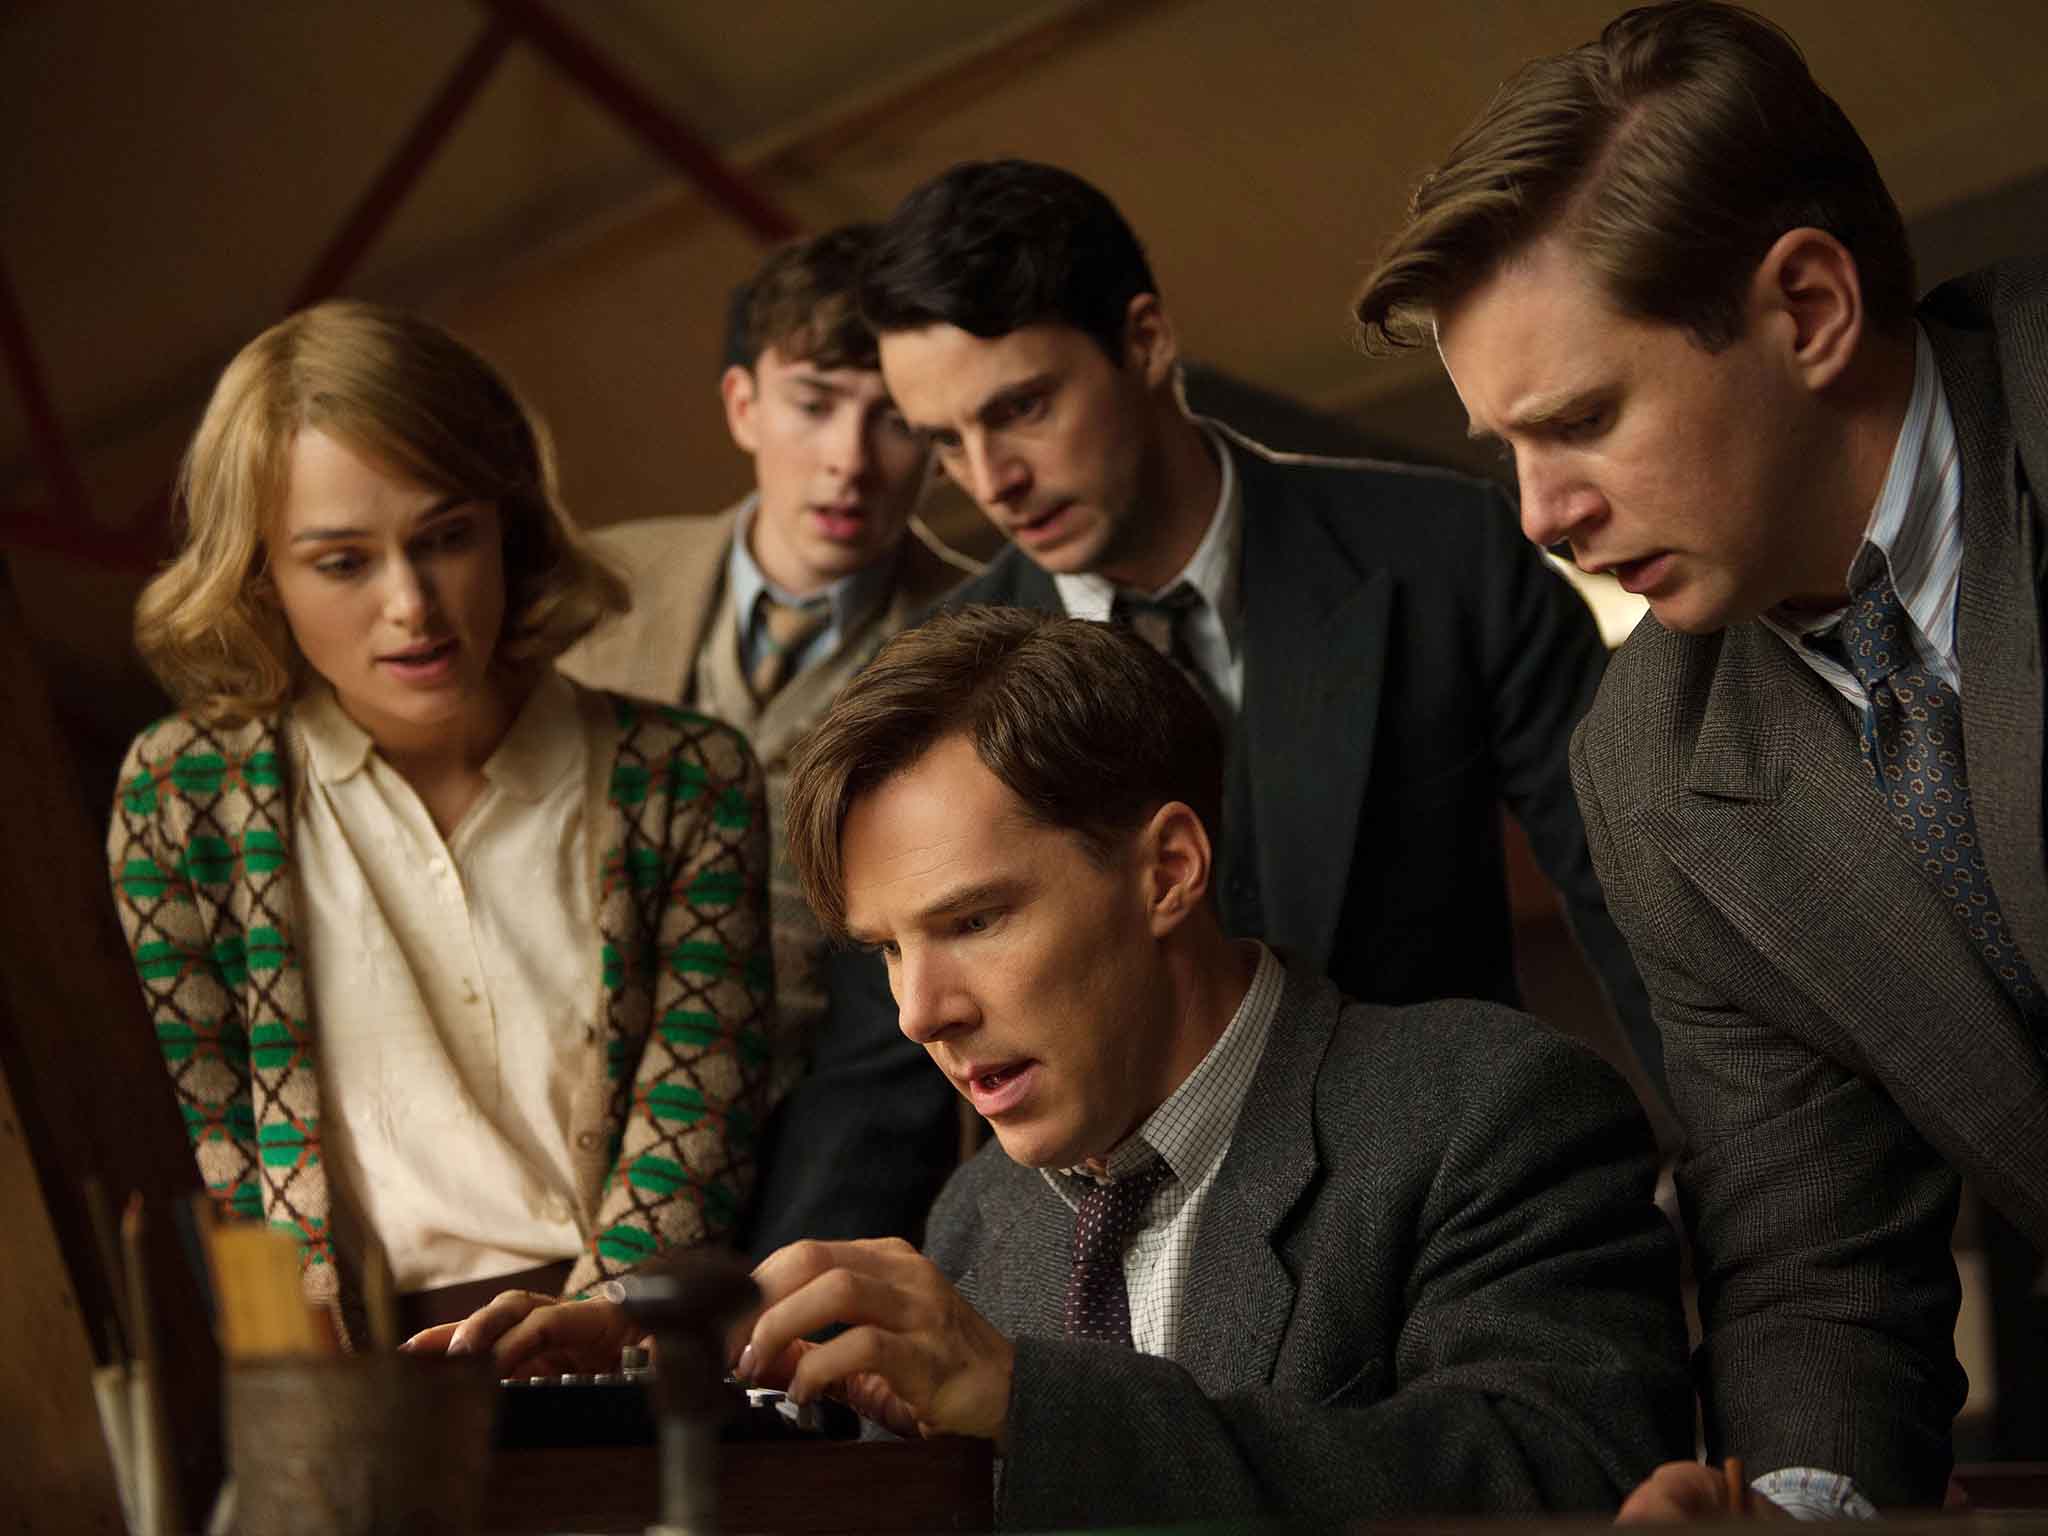 Benedict Cumberbatch on the brink of cracking Enigma as Alan Turing in The Imitation Game